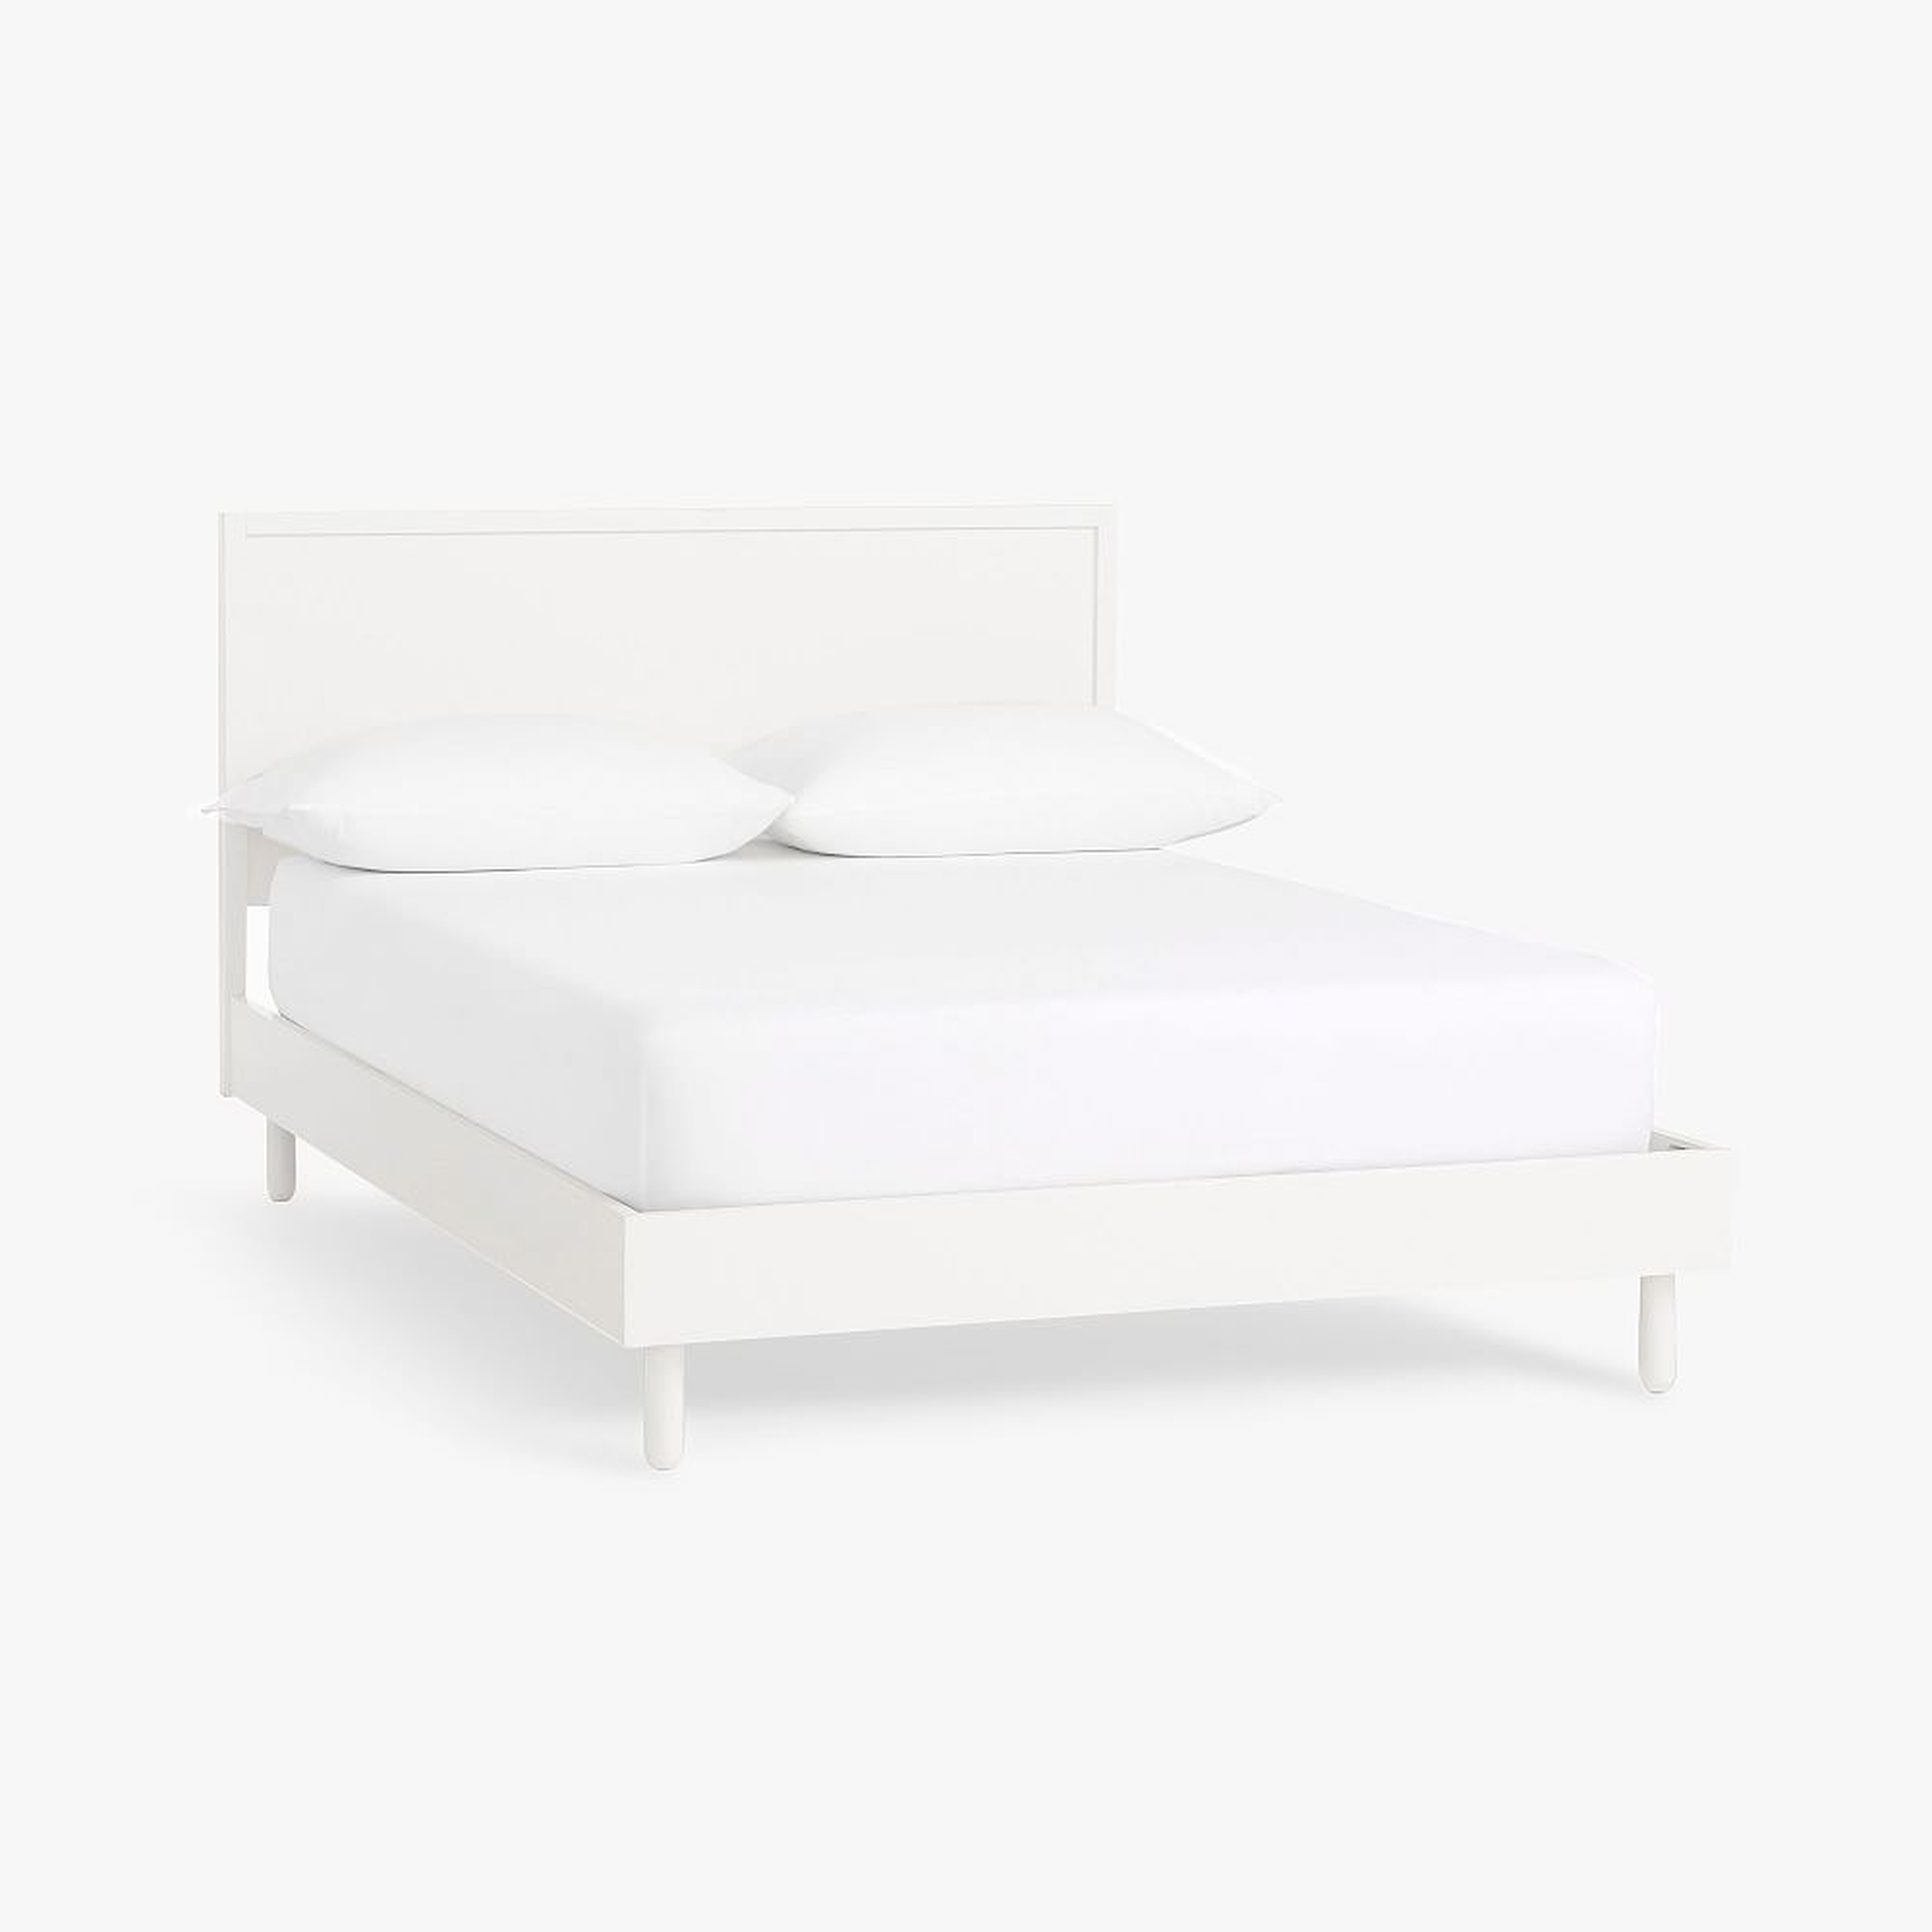 Nash Classic Platform Bed, Queen, Simply White - Pottery Barn Teen